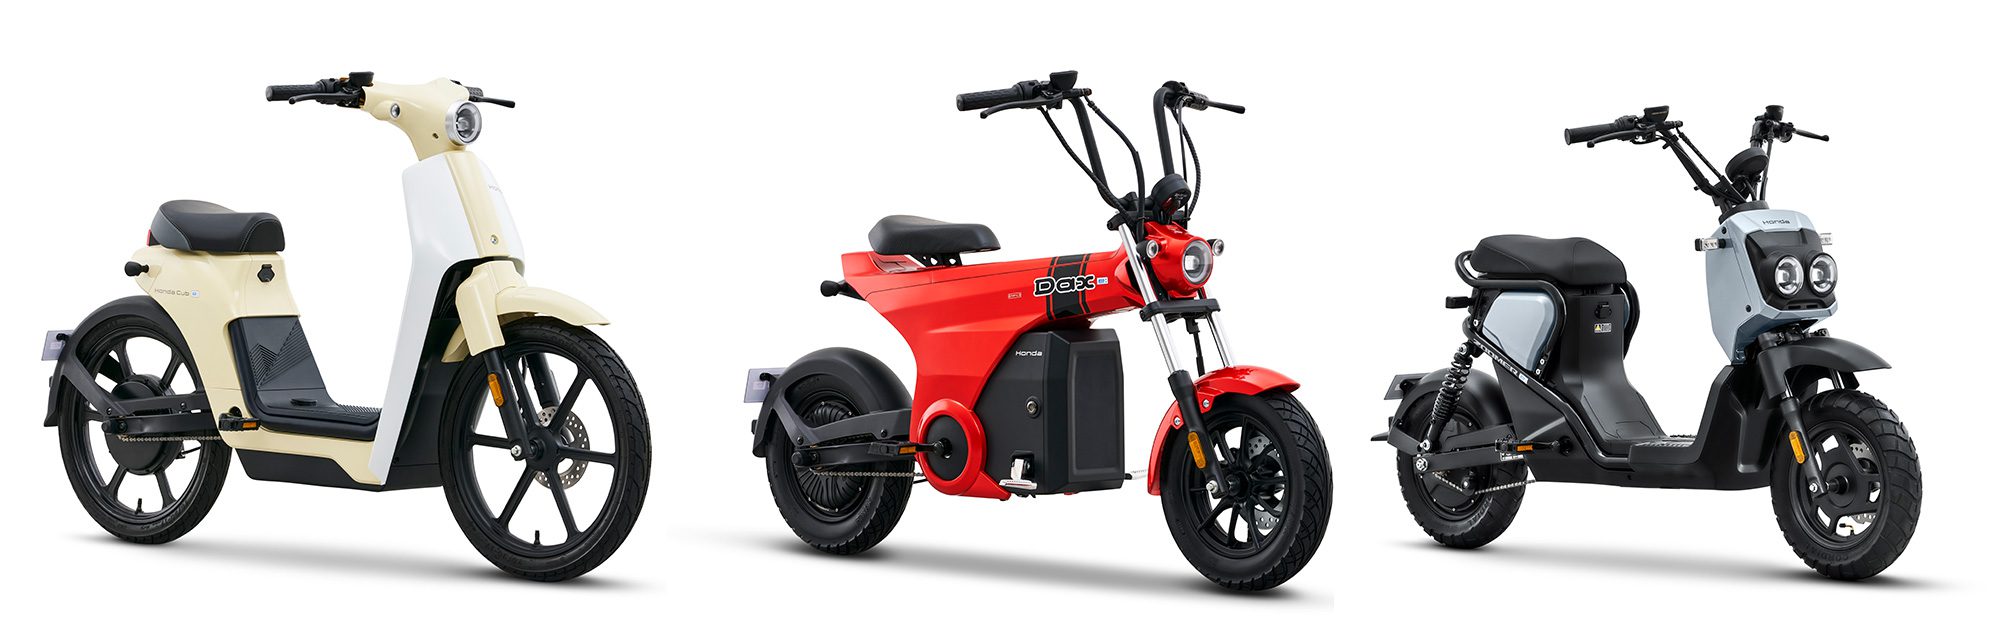 Three new Honda electric bikes to be released in China.